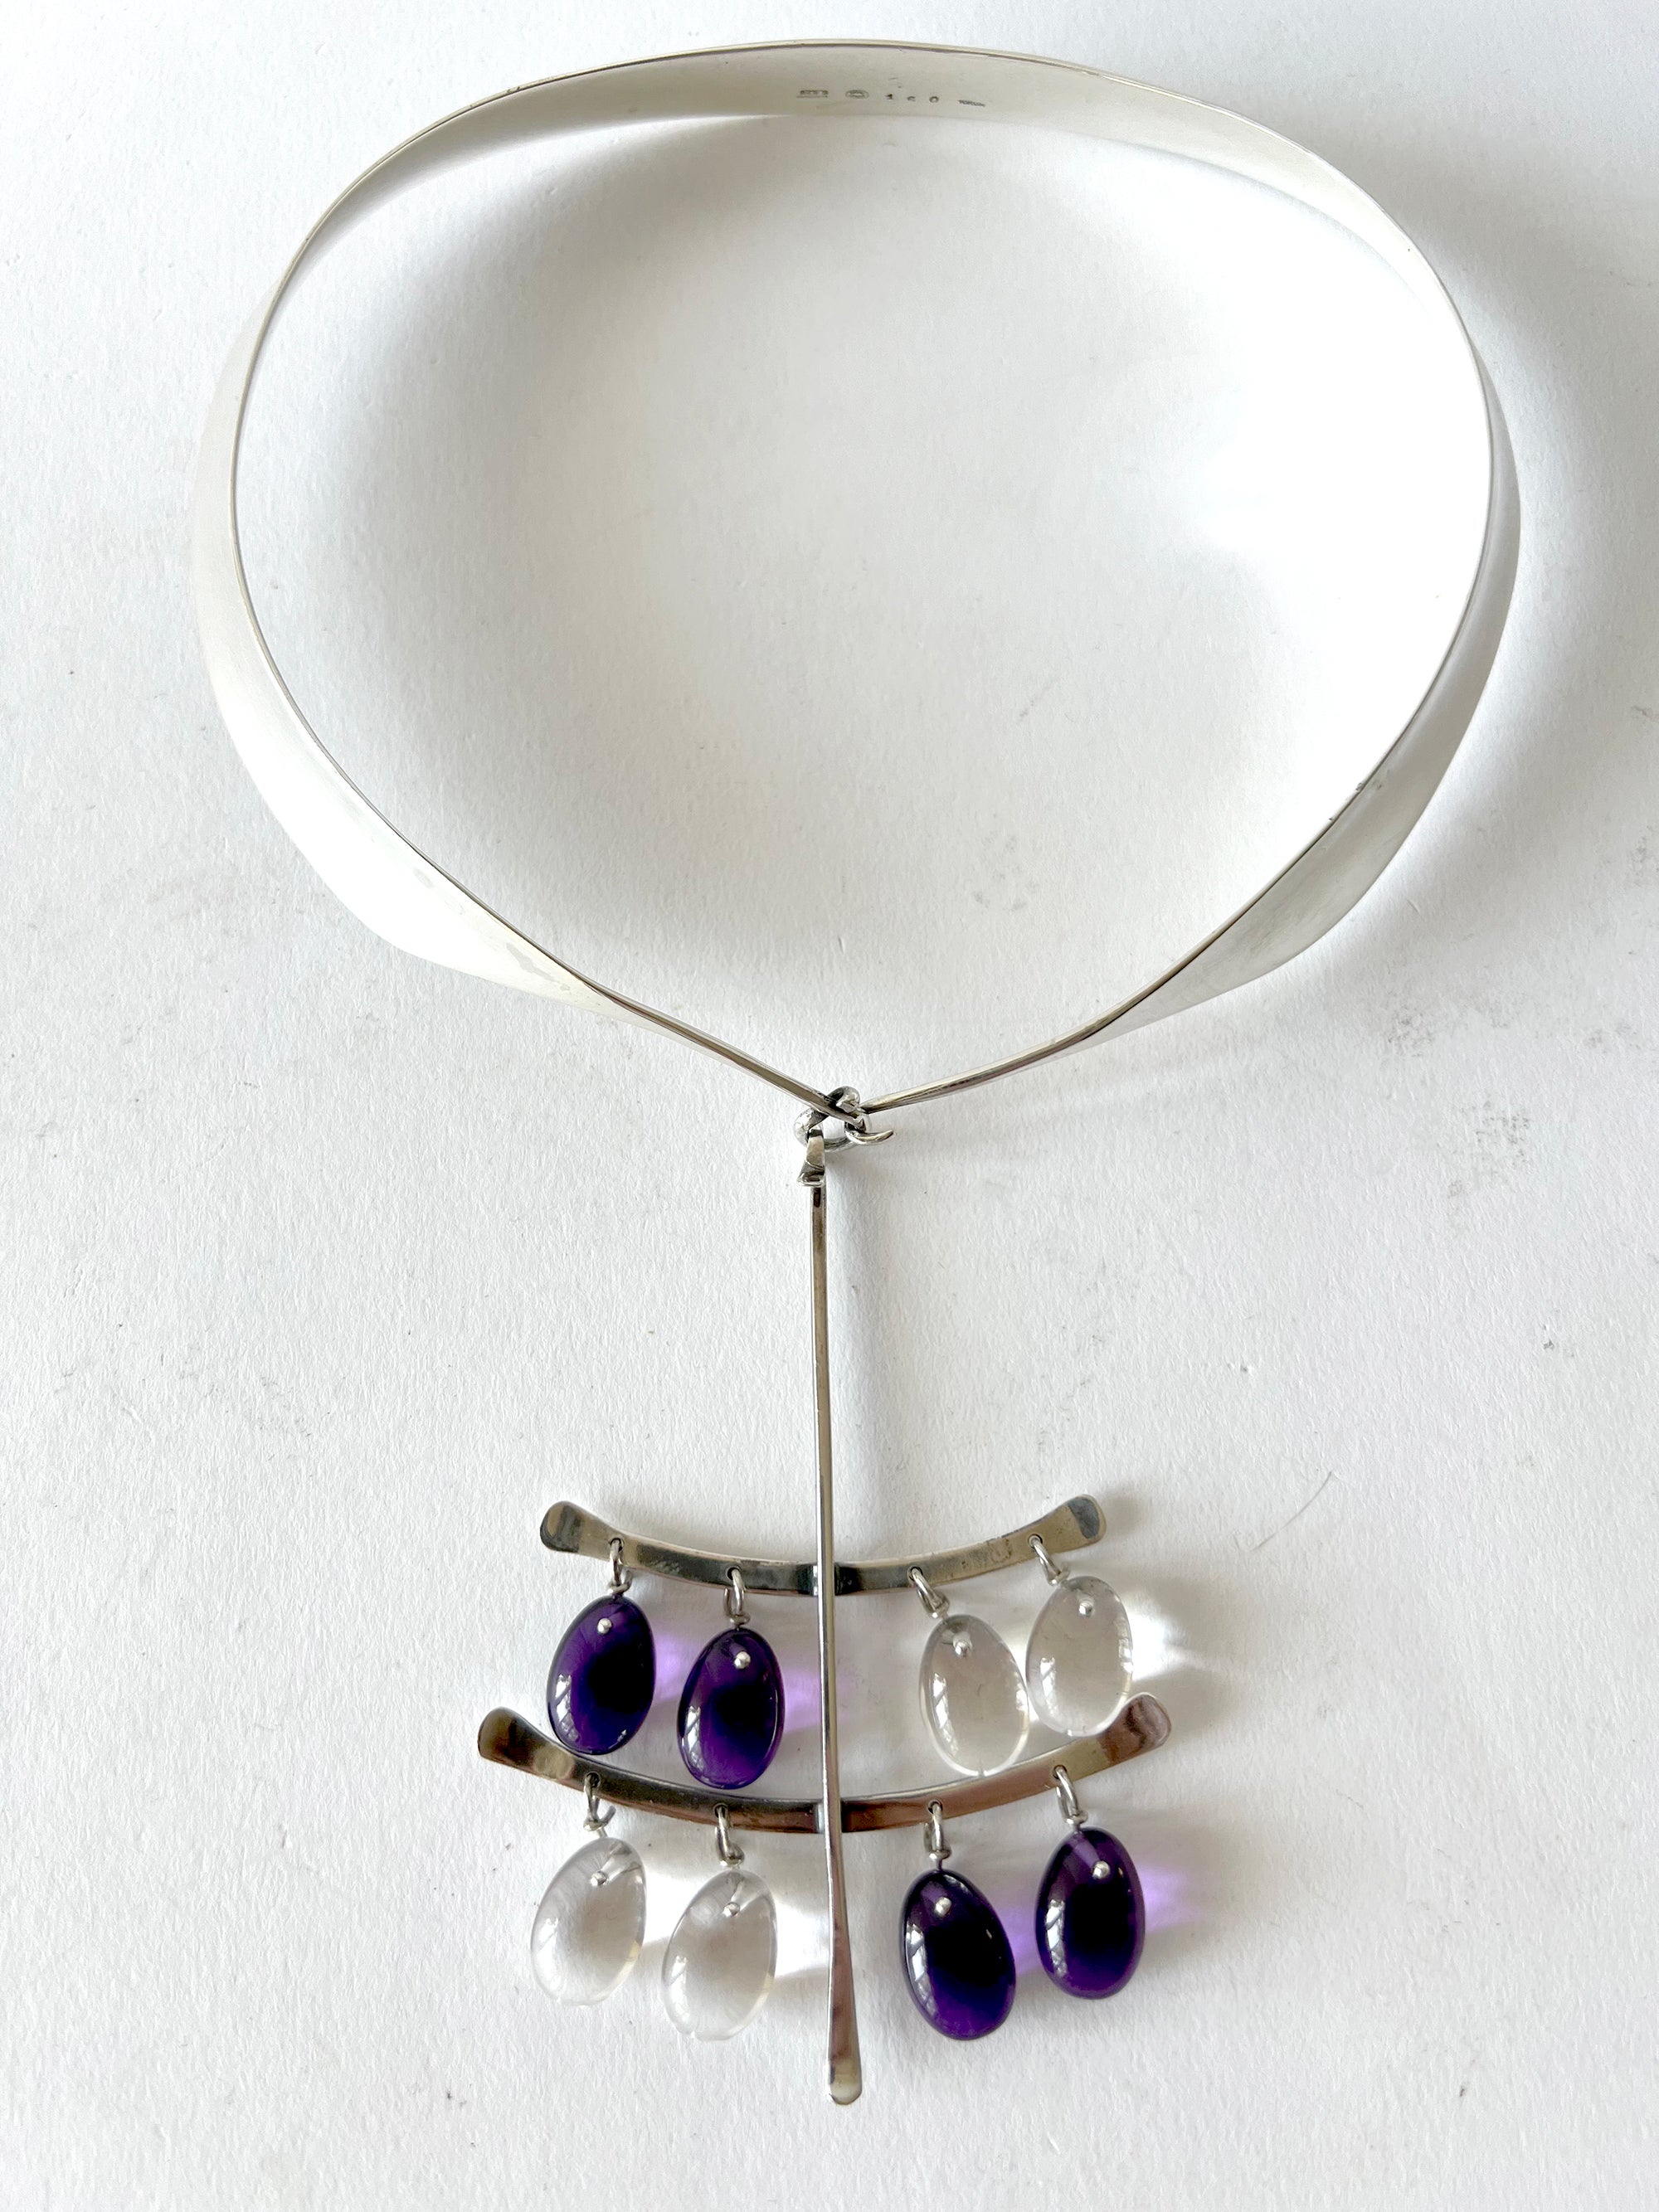 A rare, large pendant of teardrop shaped amethyst and rock quartz polished stones fastened by silver hooks. Pendant suspends from a sterling silver collar, all designed by Vivianna Torun Bulow-Hube, 1960s.  

Pendant measures 4